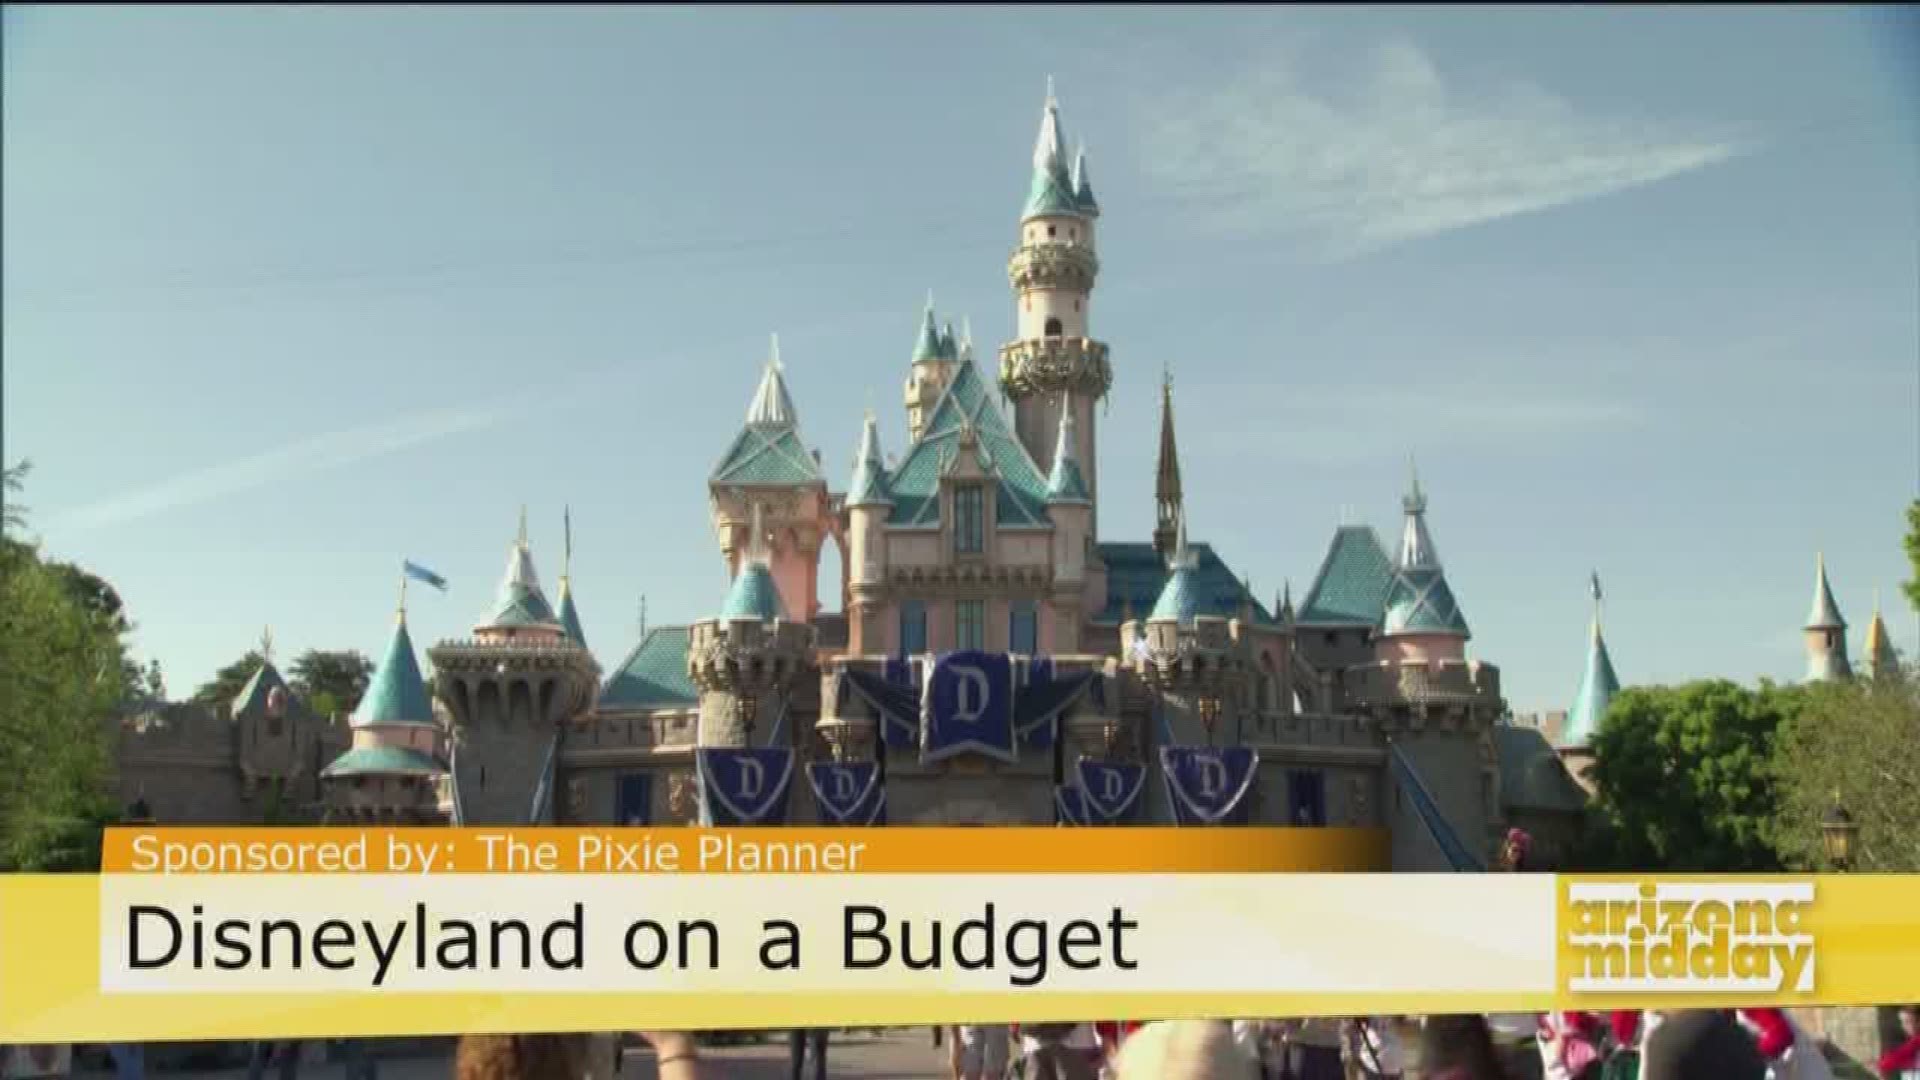 The Pixie Planner Shana O'Mara shows us how she helps plan a magical adventure to Disneyland without breaking the budget!